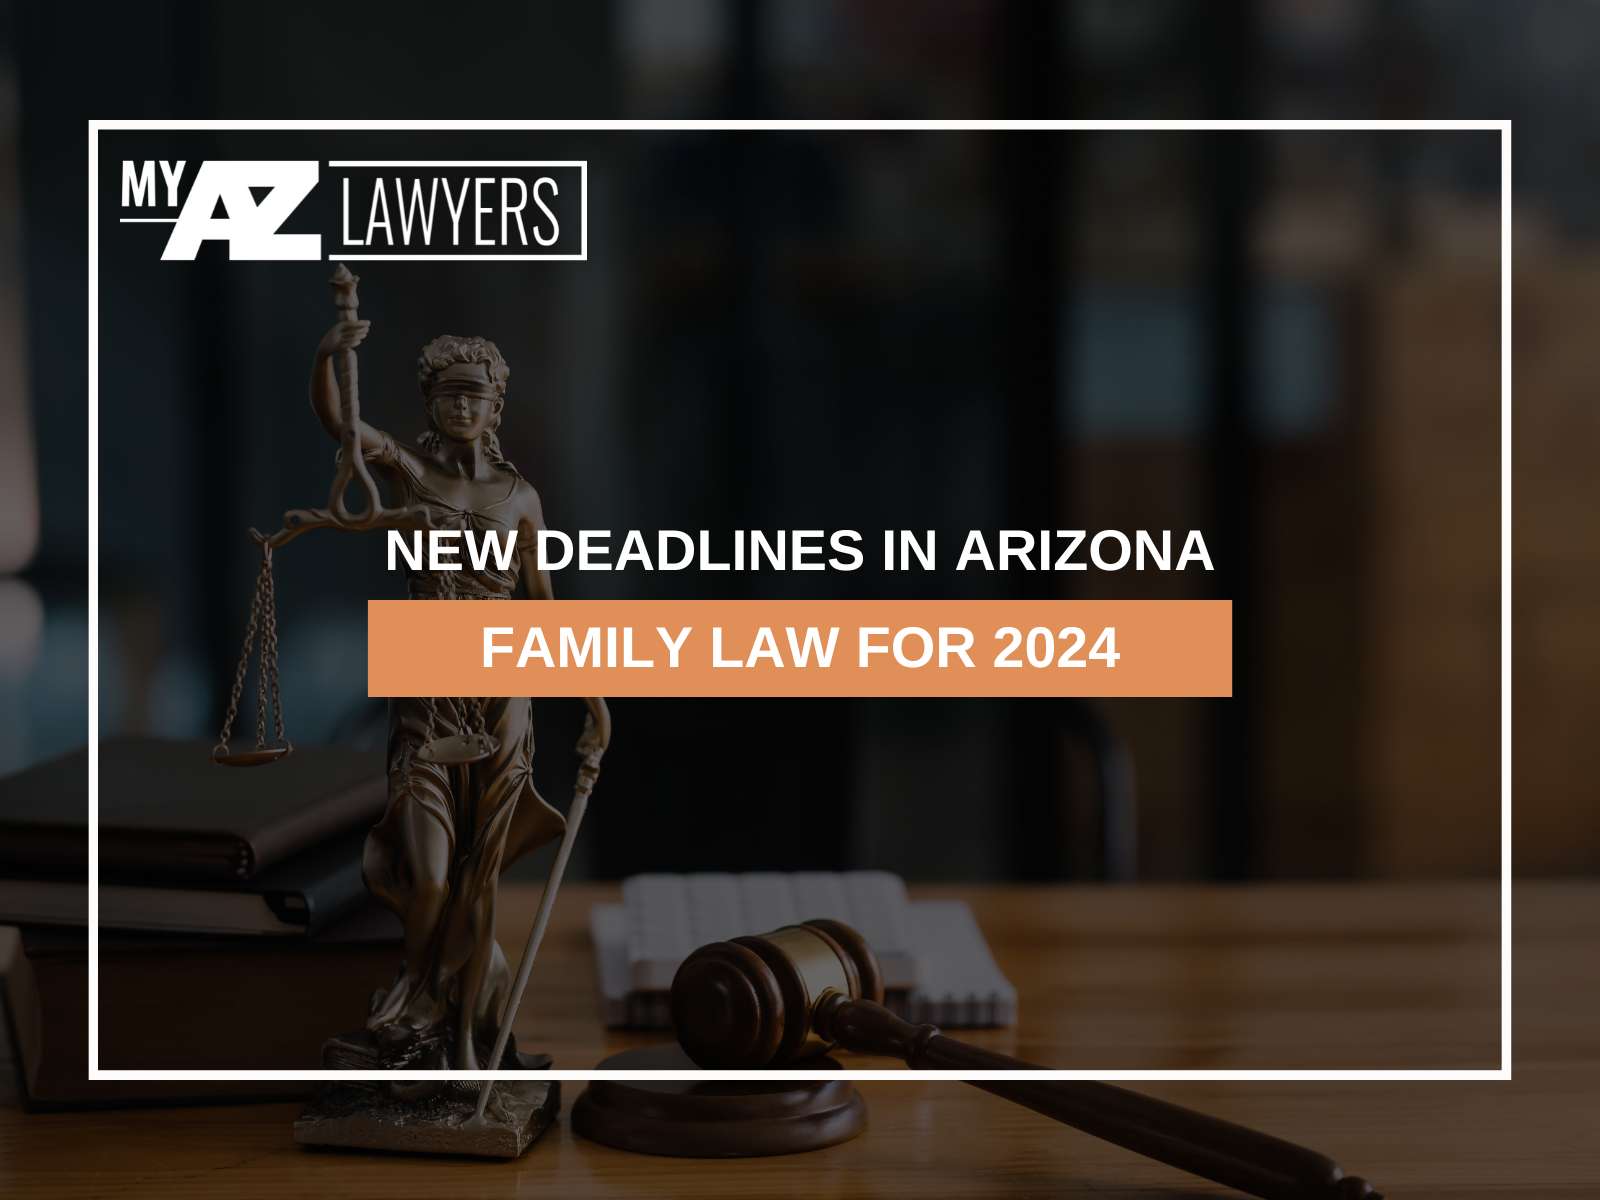 New Deadlines in Arizona Family Law for 2024